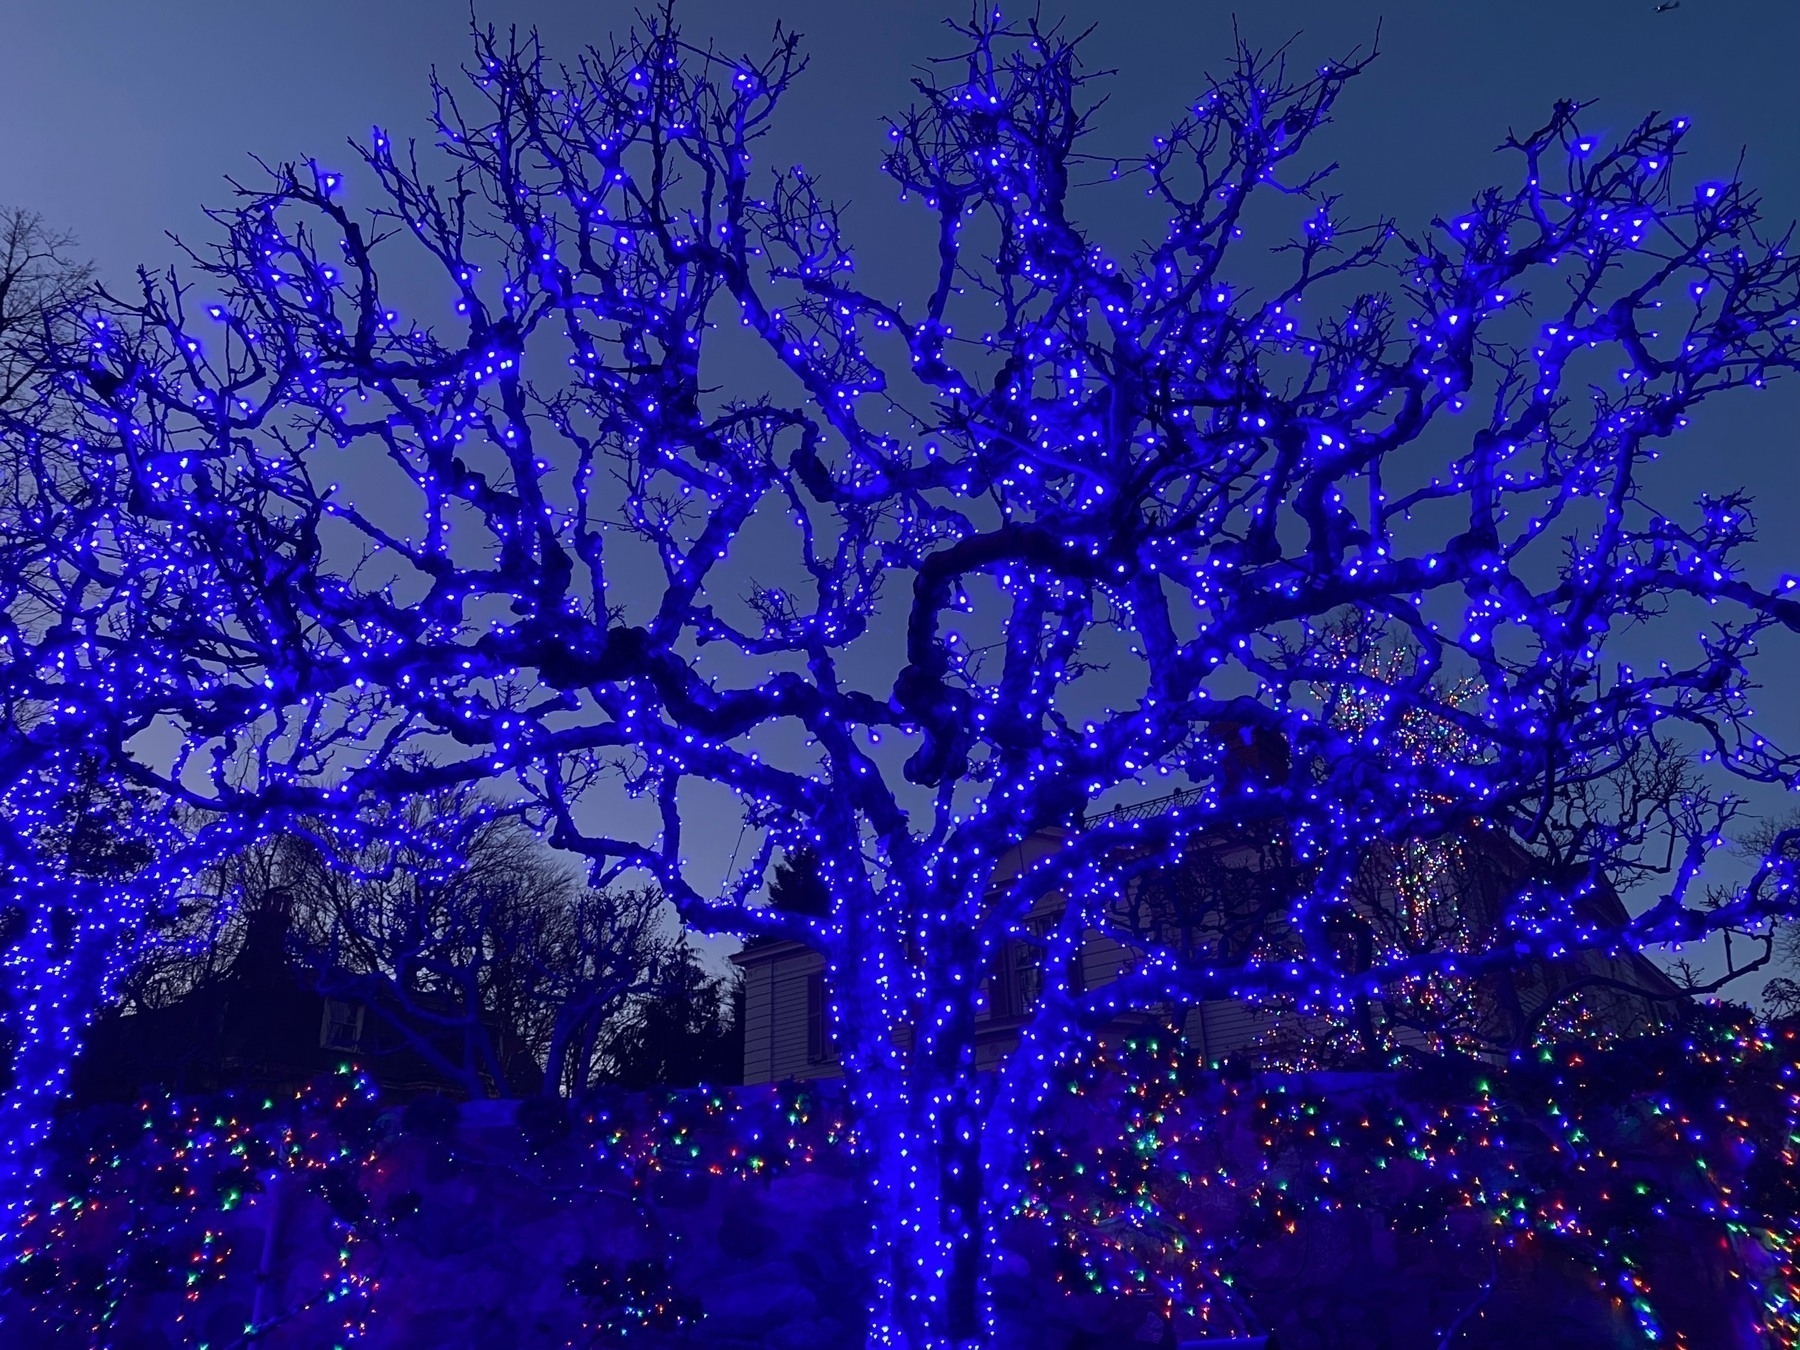 A dark leafless tree covered in blue lights against a dark blue sky.